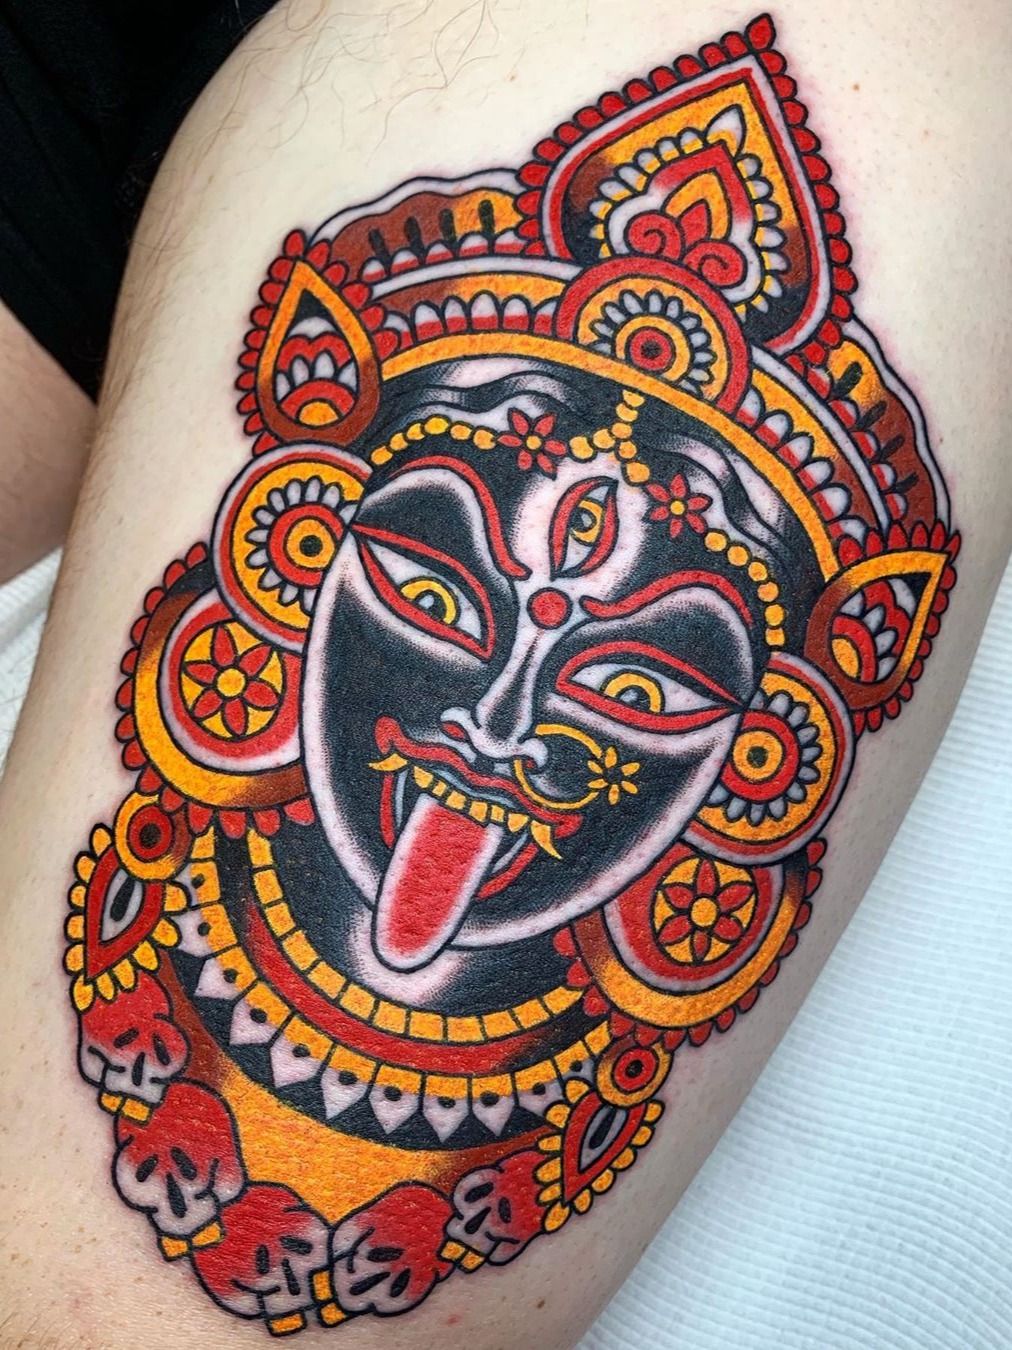 Festive cheer: Navratri, Durga Puja tattoos are trending despite pandemic,  say tattoo artists | Art-and-culture News - The Indian Express